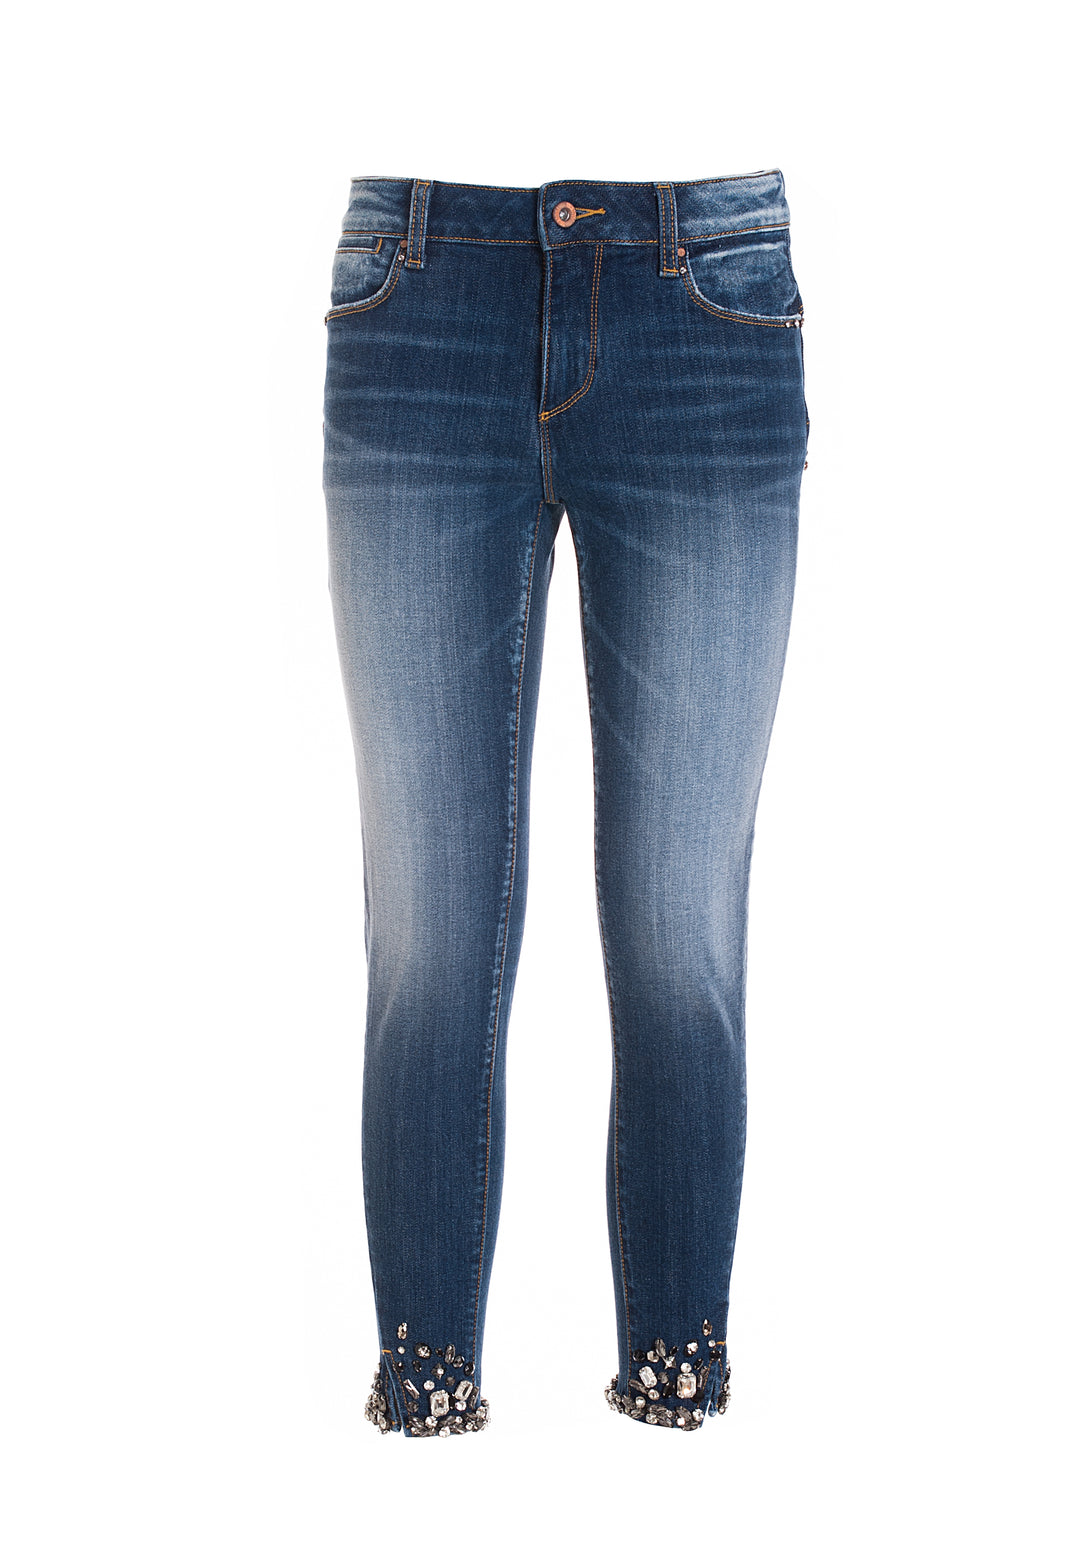 Jeans slim fit with shape-up effect made in denim with strong wash